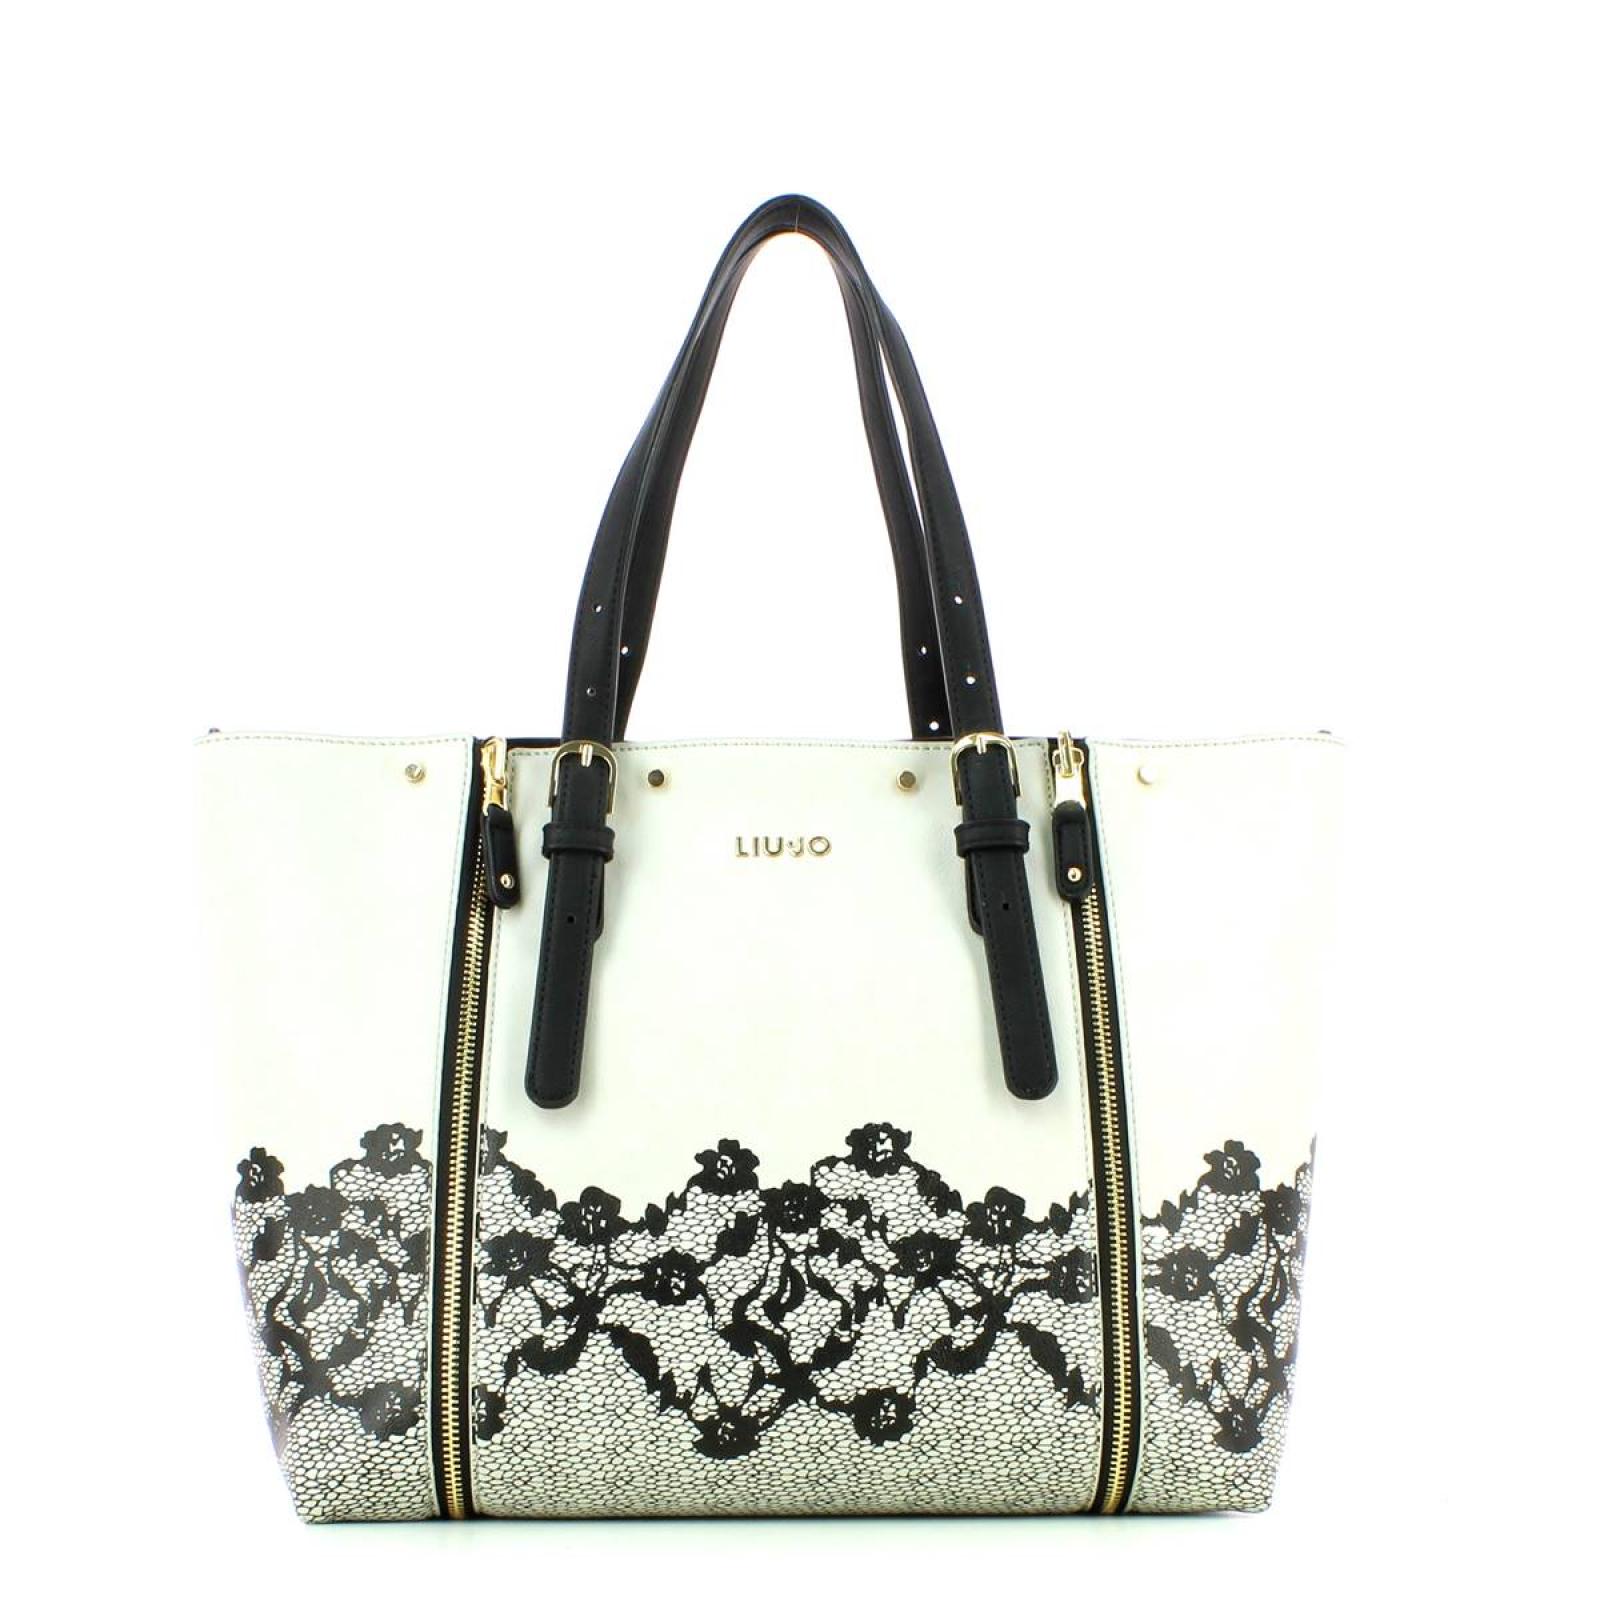 SHOPPING BAG AROMIA LACE